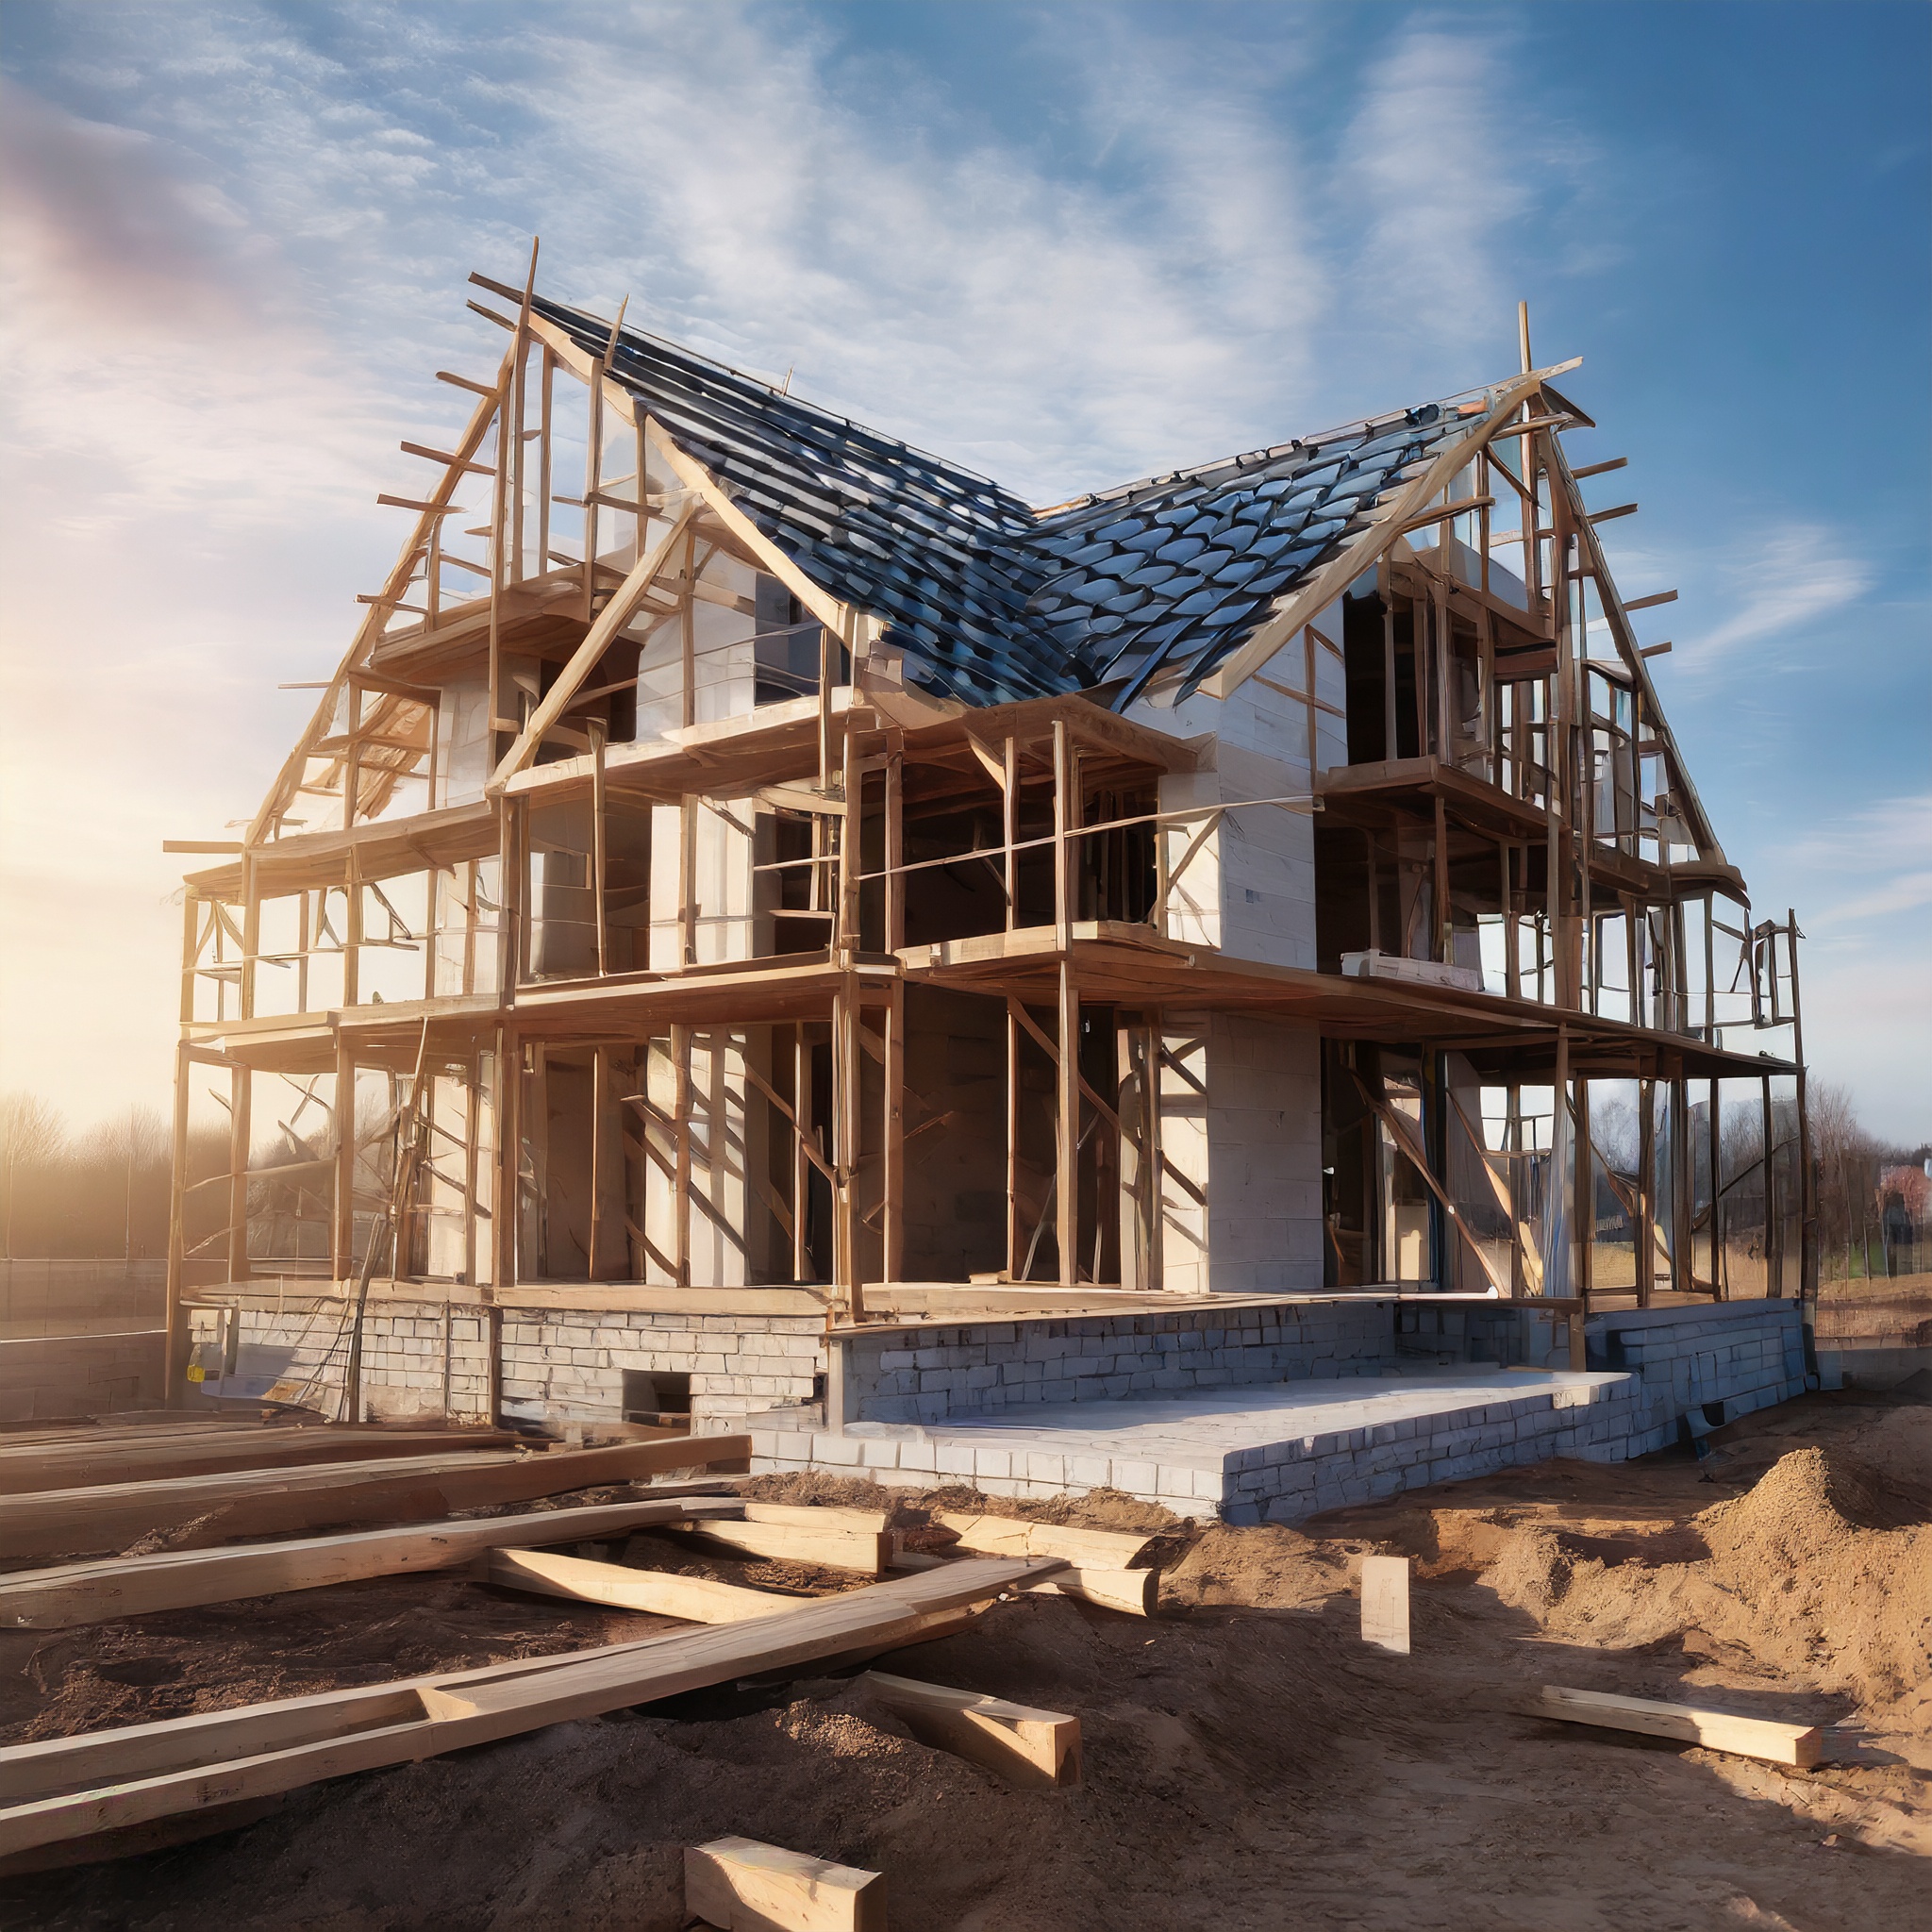 NSW develops pre-approved patterns for home building